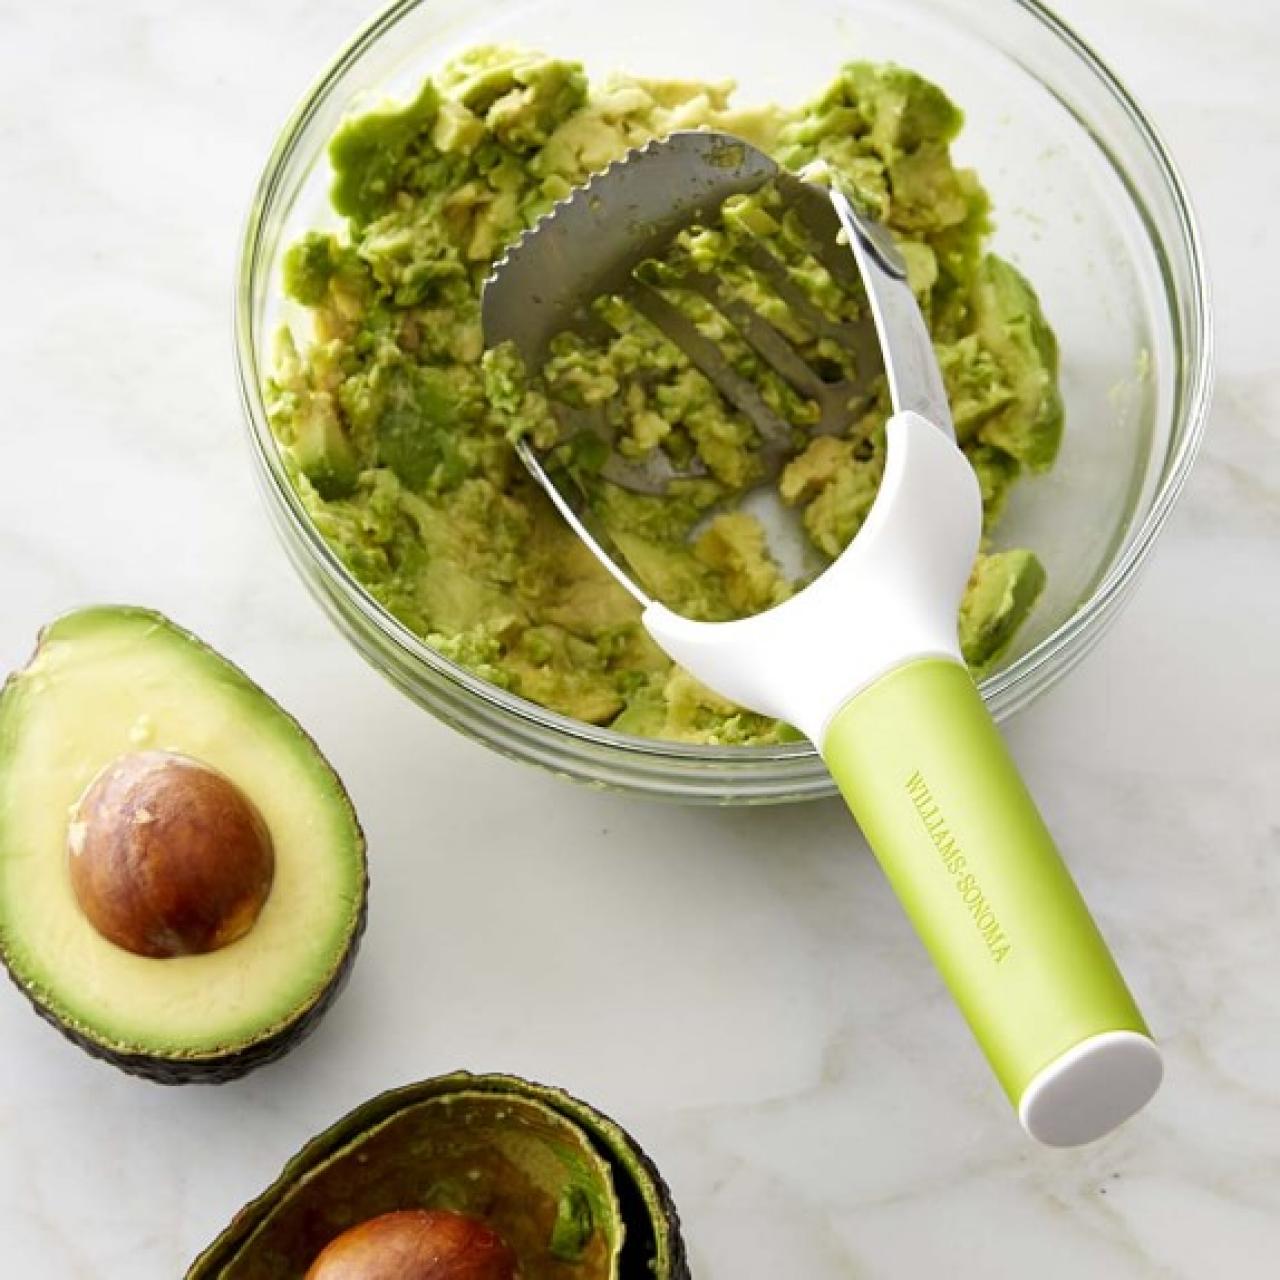 This 3-in-1 Avocado Slicer Helps You Make a Mean Guac